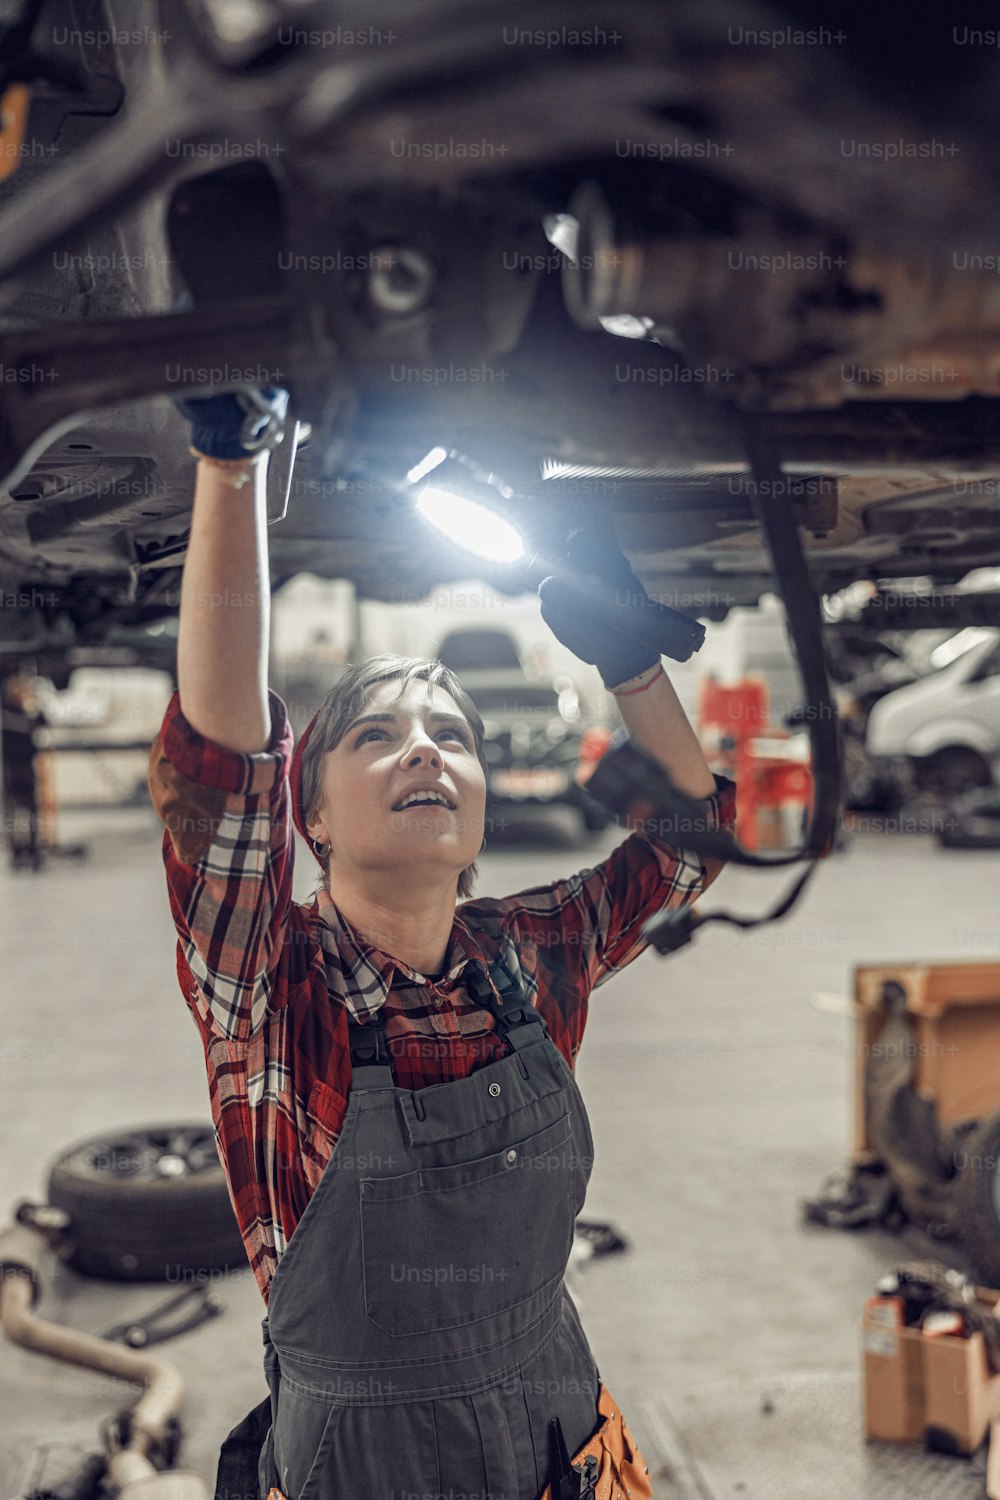 Concentrated female standing under a raised vehicle in a workshop